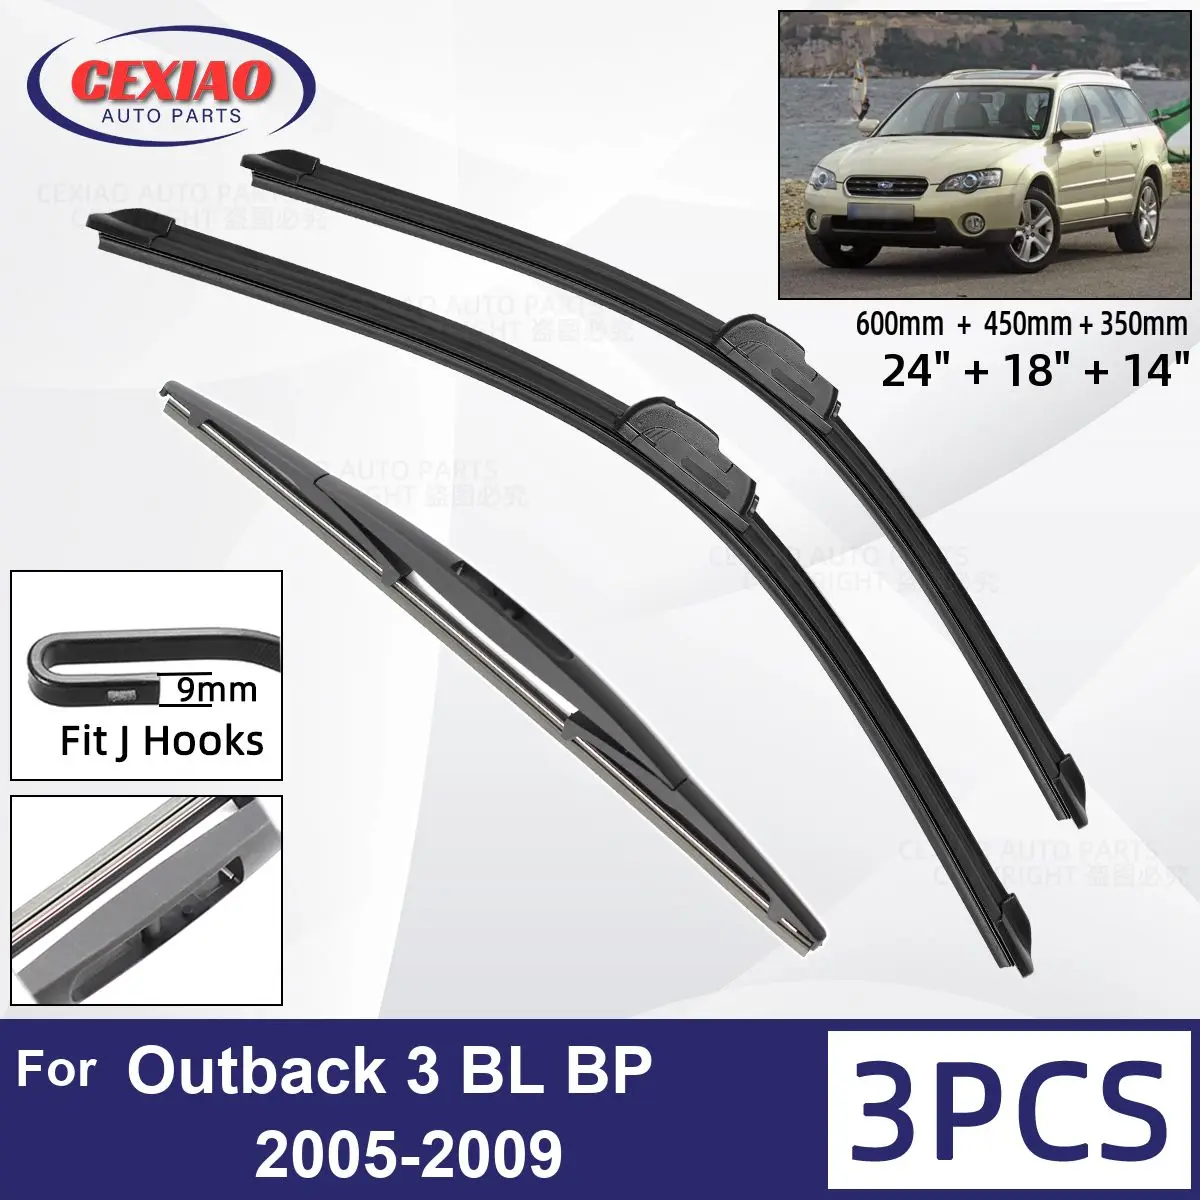 

For Subaru Outback 3 BL BP 2005-2009 Car Front Rear Wiper Blades Soft Rubber Windscreen Wipers Auto Windshield 24"18"14" 2008